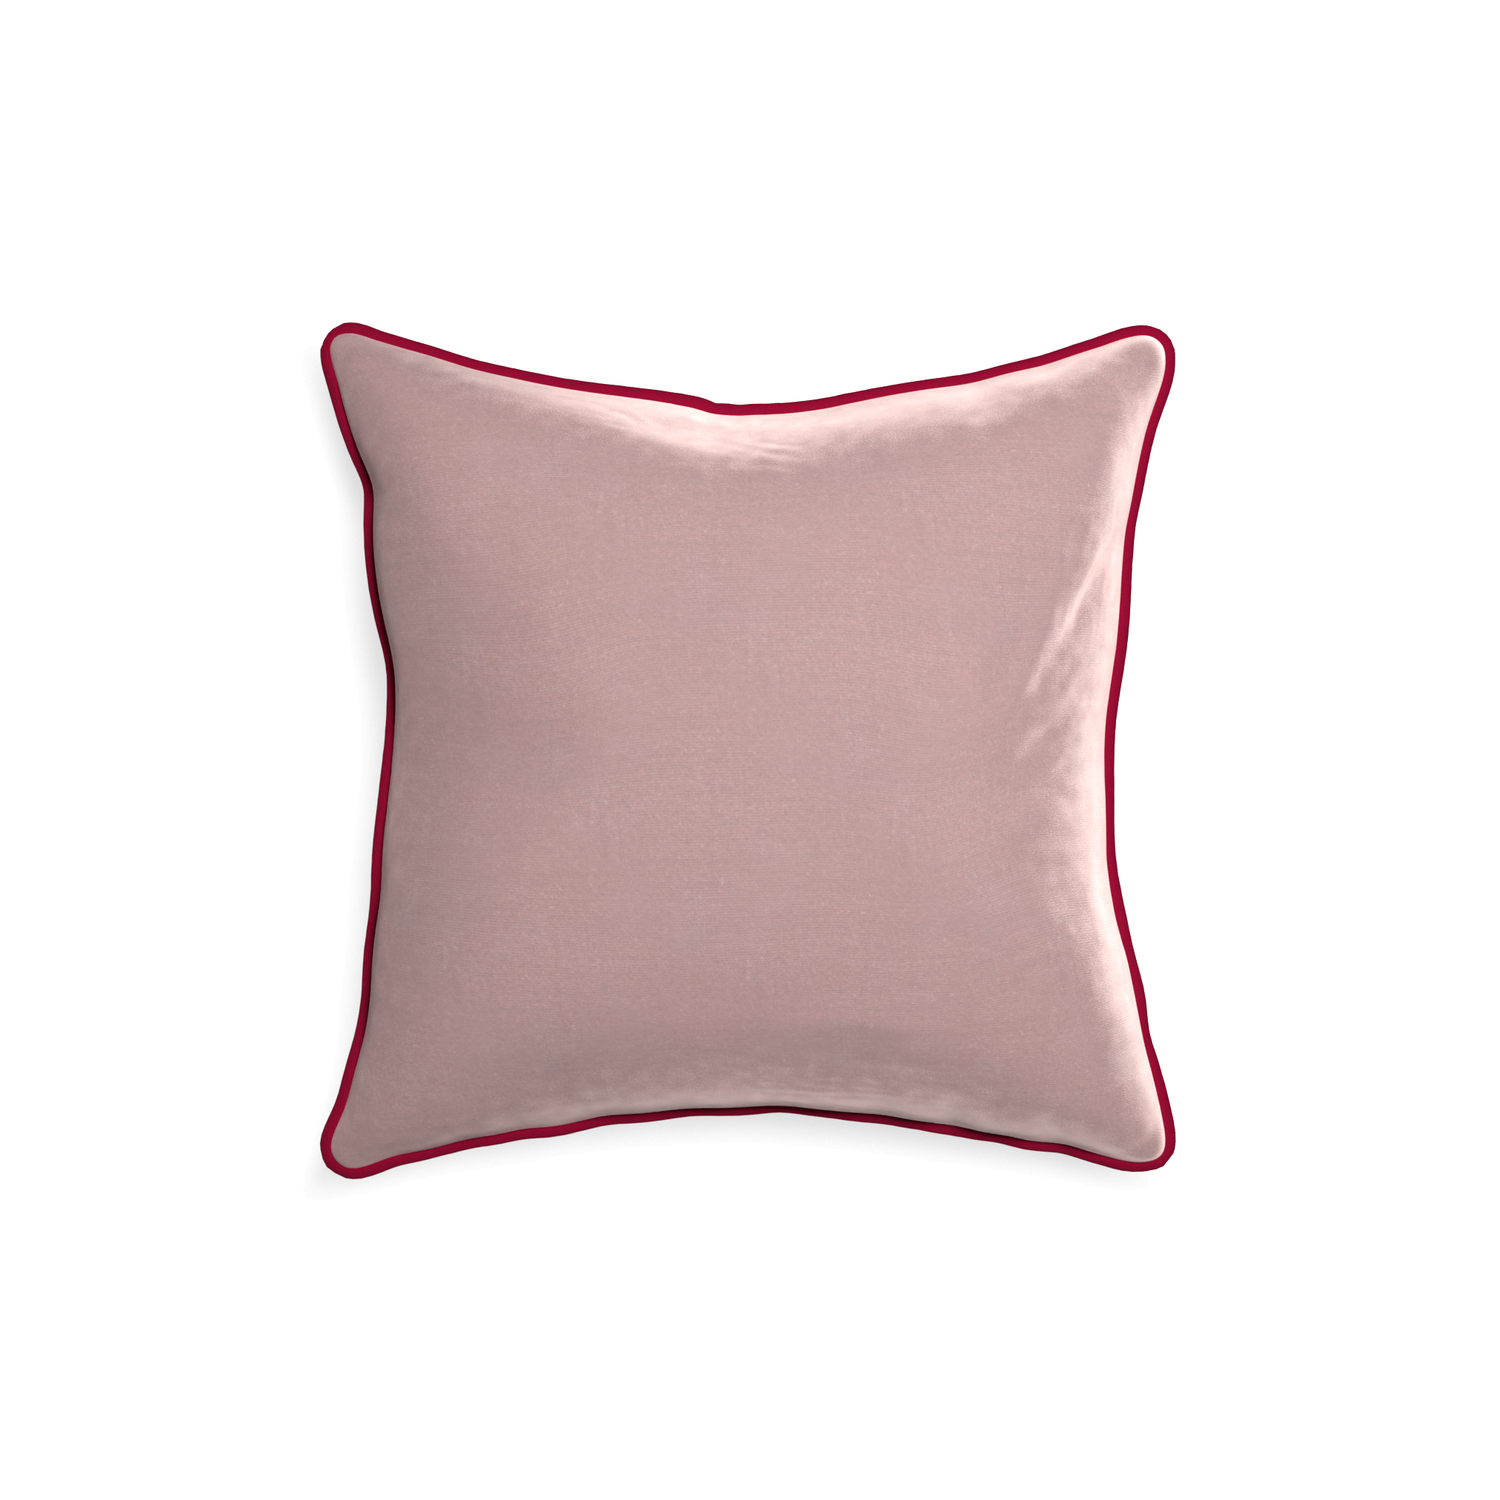 18-square mauve velvet custom pillow with raspberry piping on white background